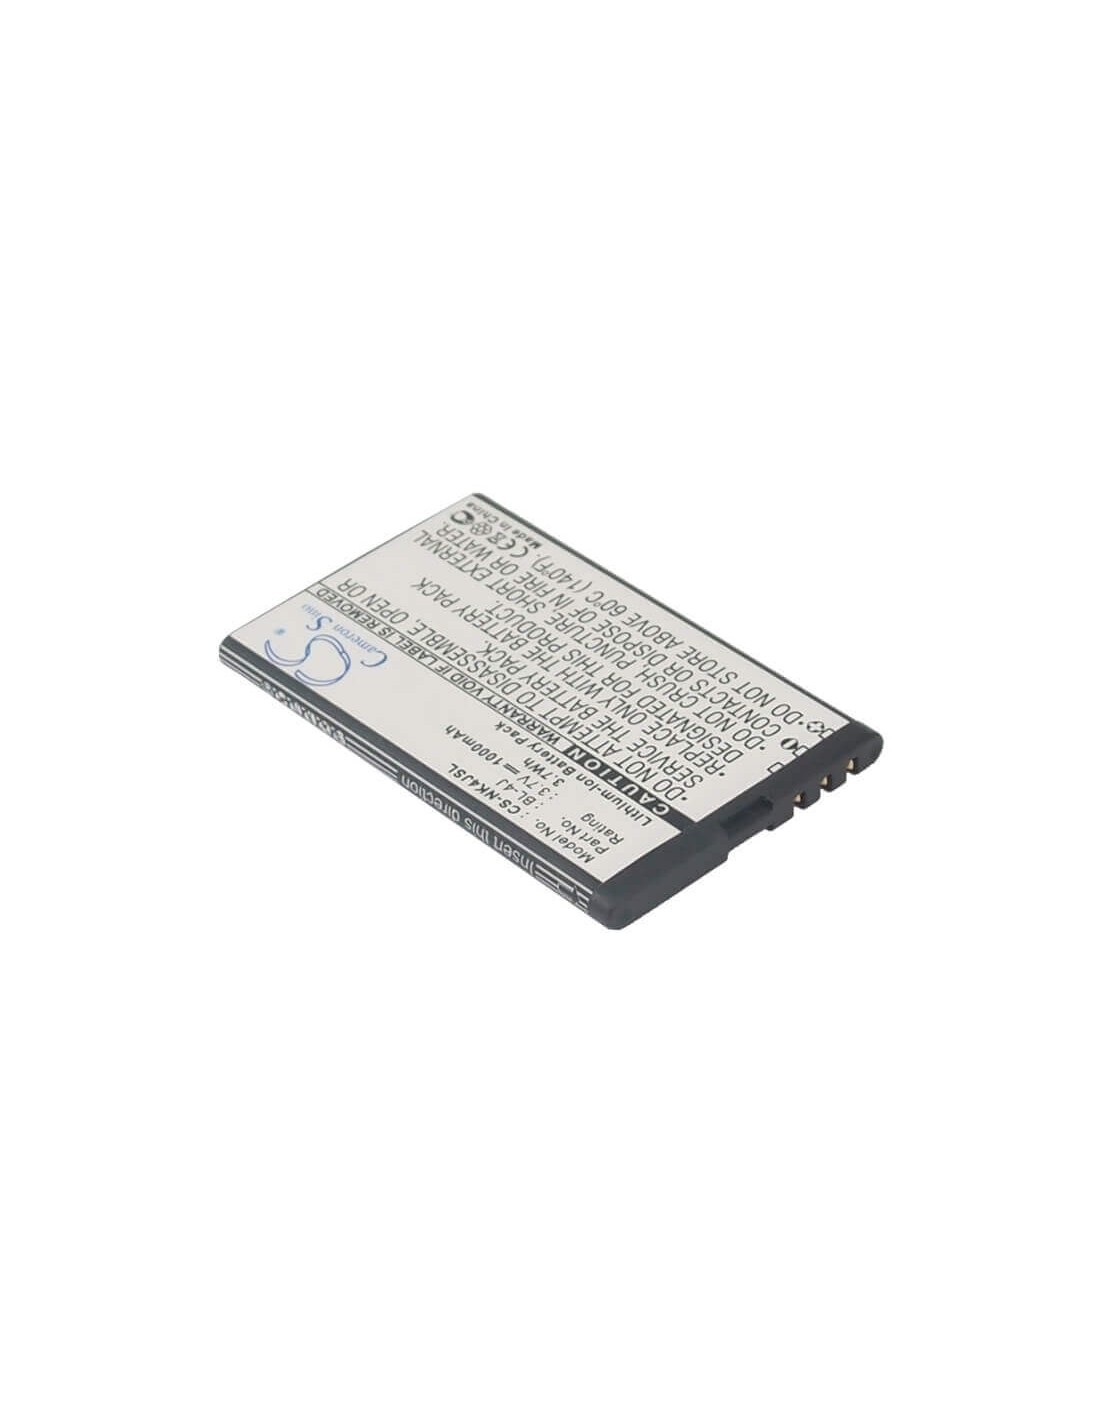 Battery for Nokia C6, C6-00, Touch 3G 3.7V, 1000mAh - 3.70Wh